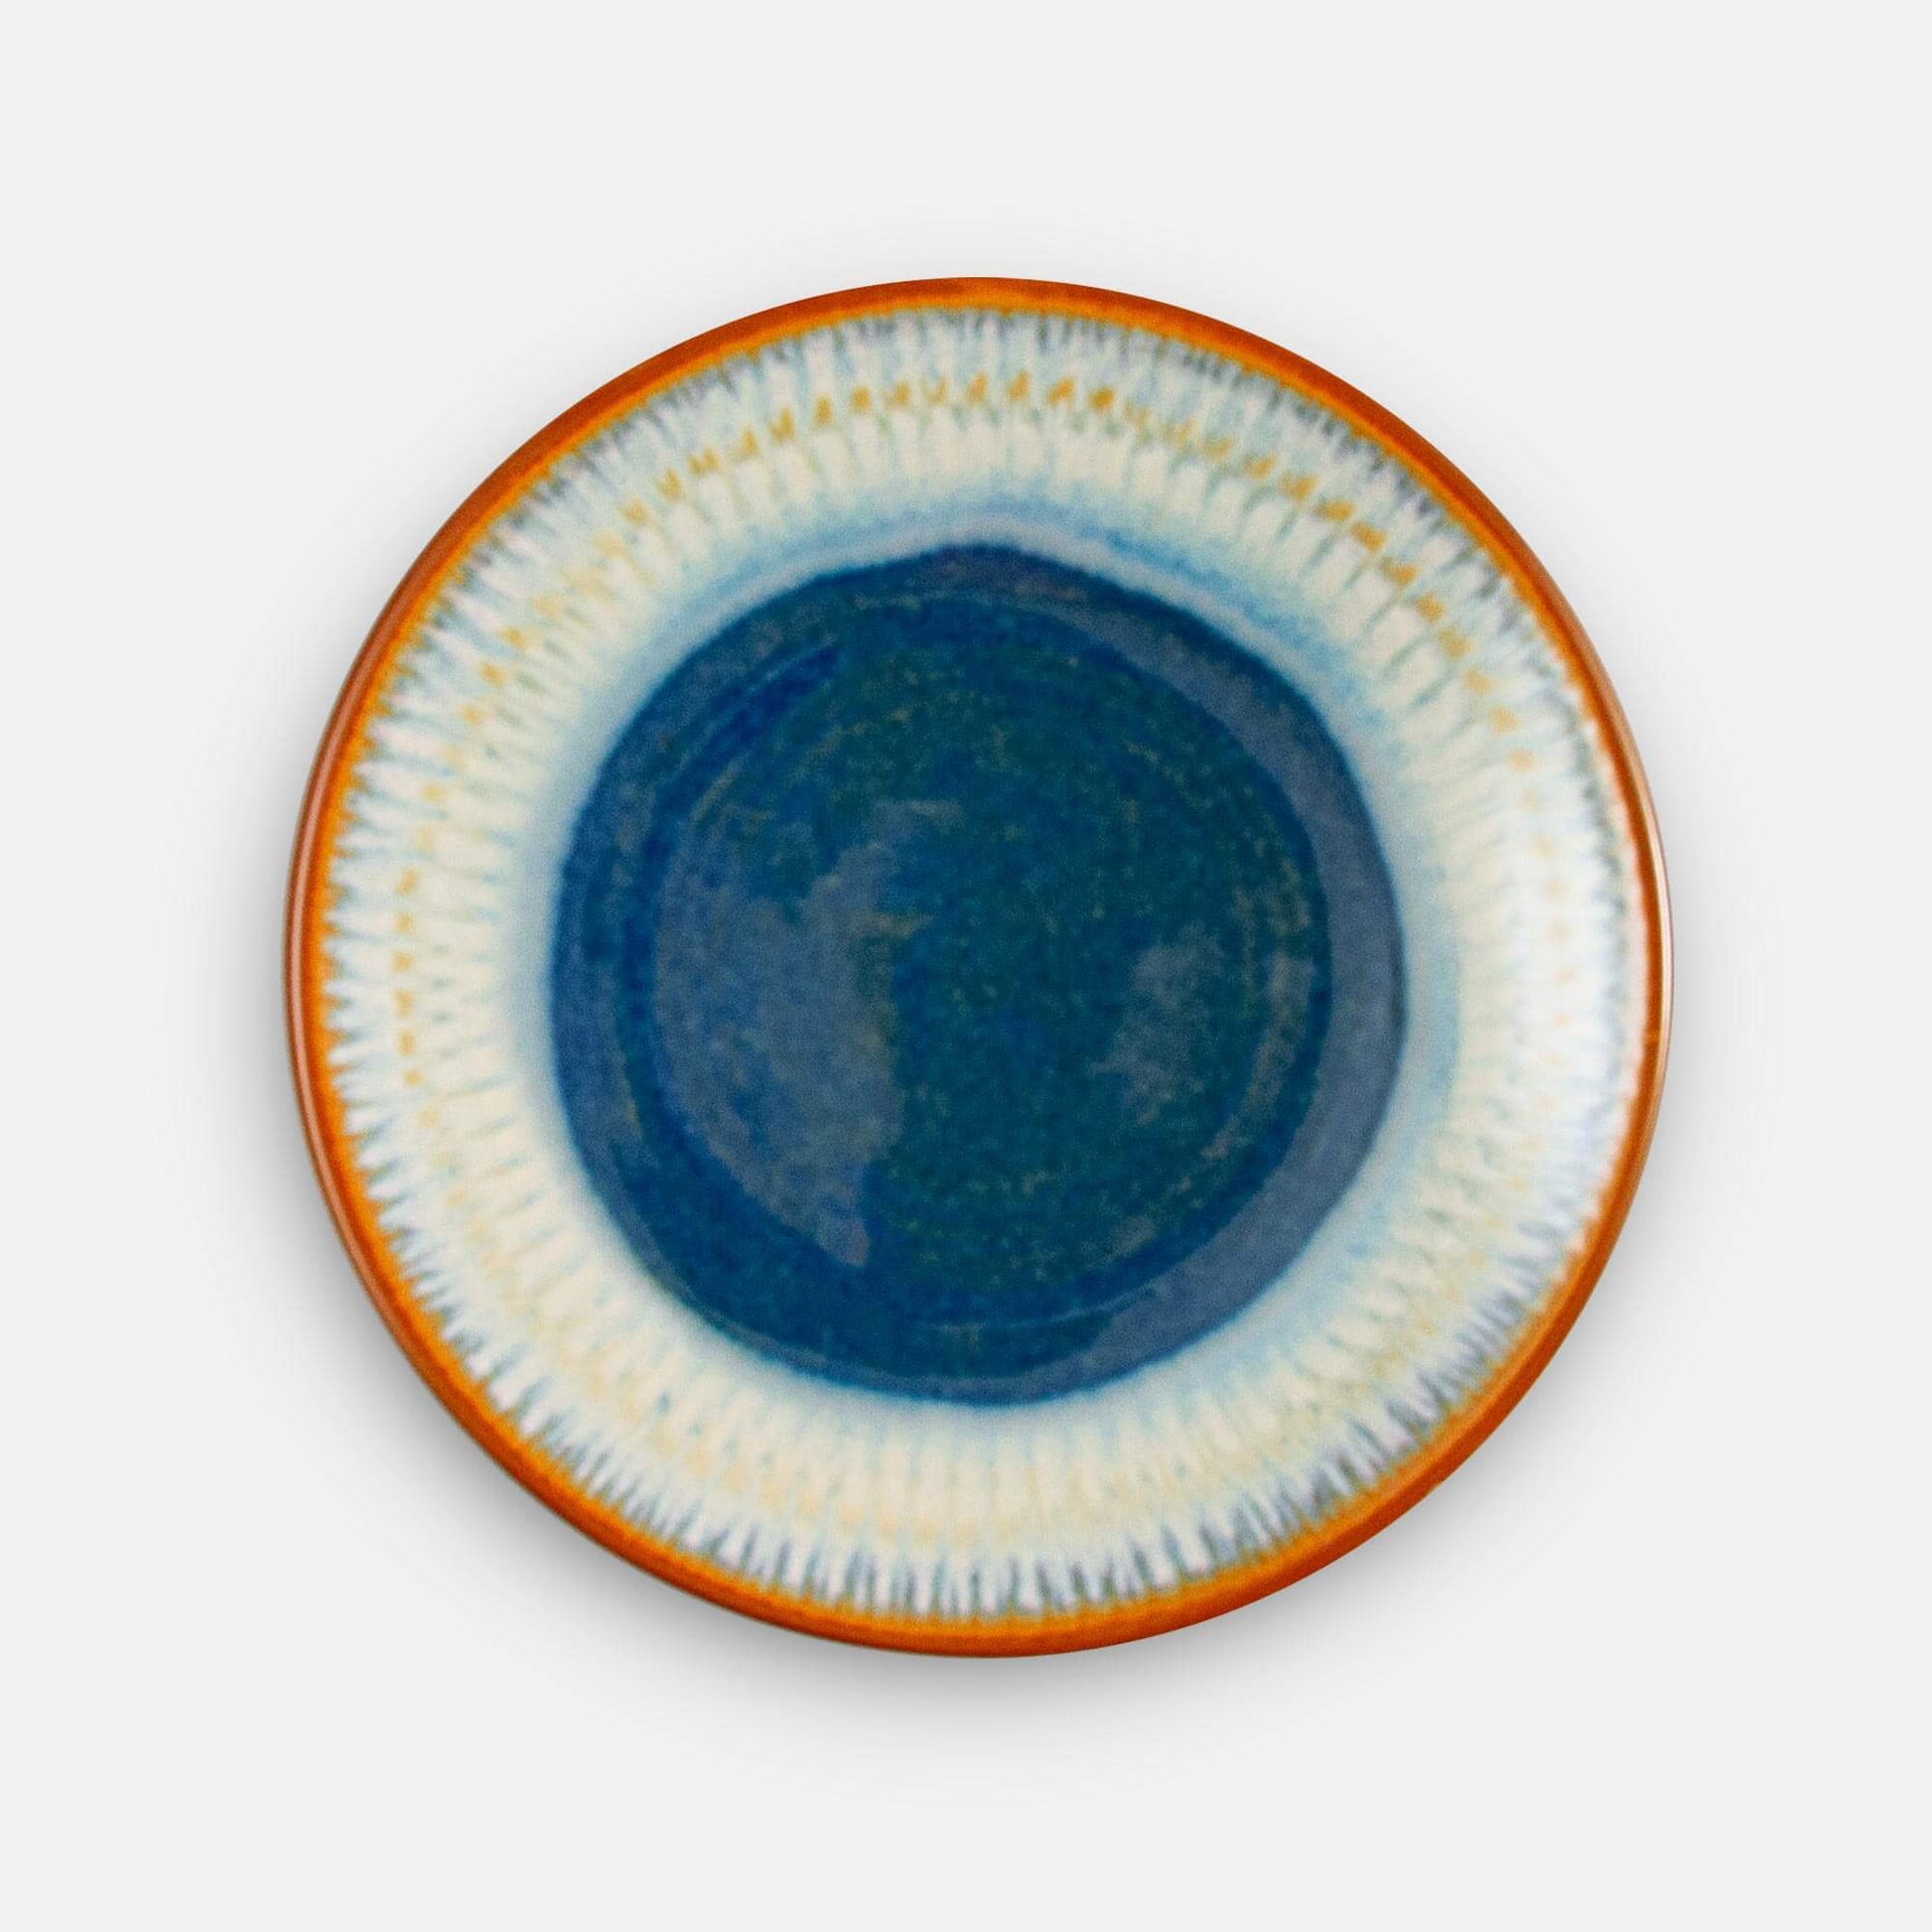 Handmade Pottery Classic Dessert Plate in Cobalt pattern made by Georgetown Pottery in Maine